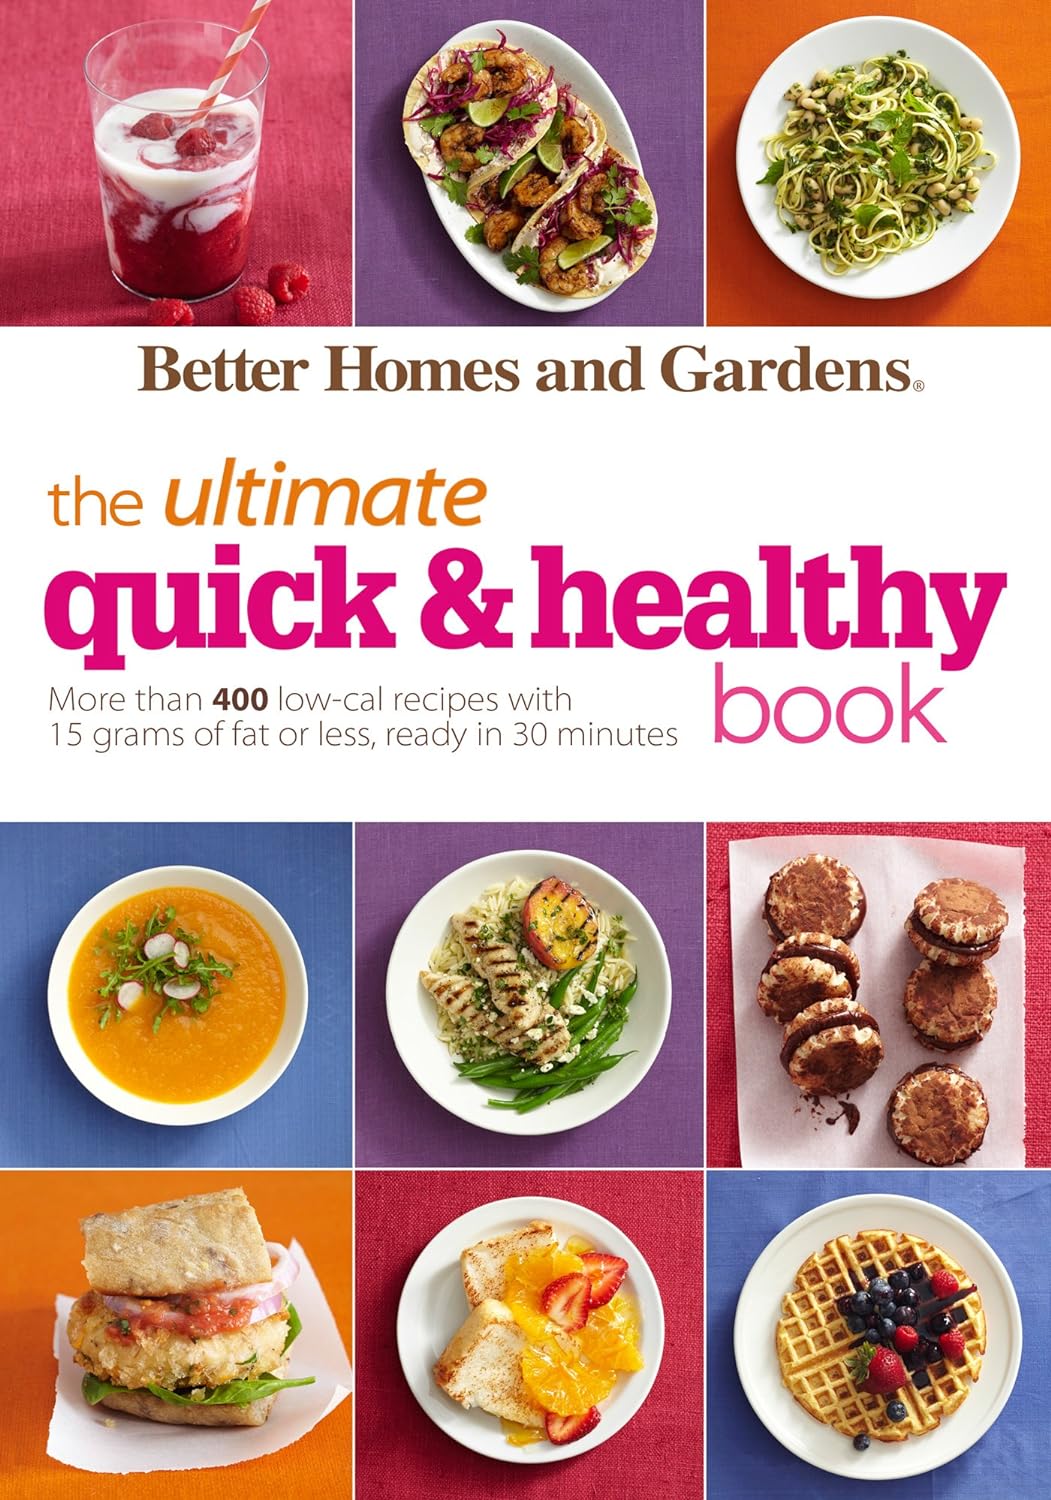 Better Homes and Gardens : The Ultimate Quick & Healthy Book : More Than 400 Low-Cal Recipes with 15 Grams of Fat or Less, Ready in 30 Minutes